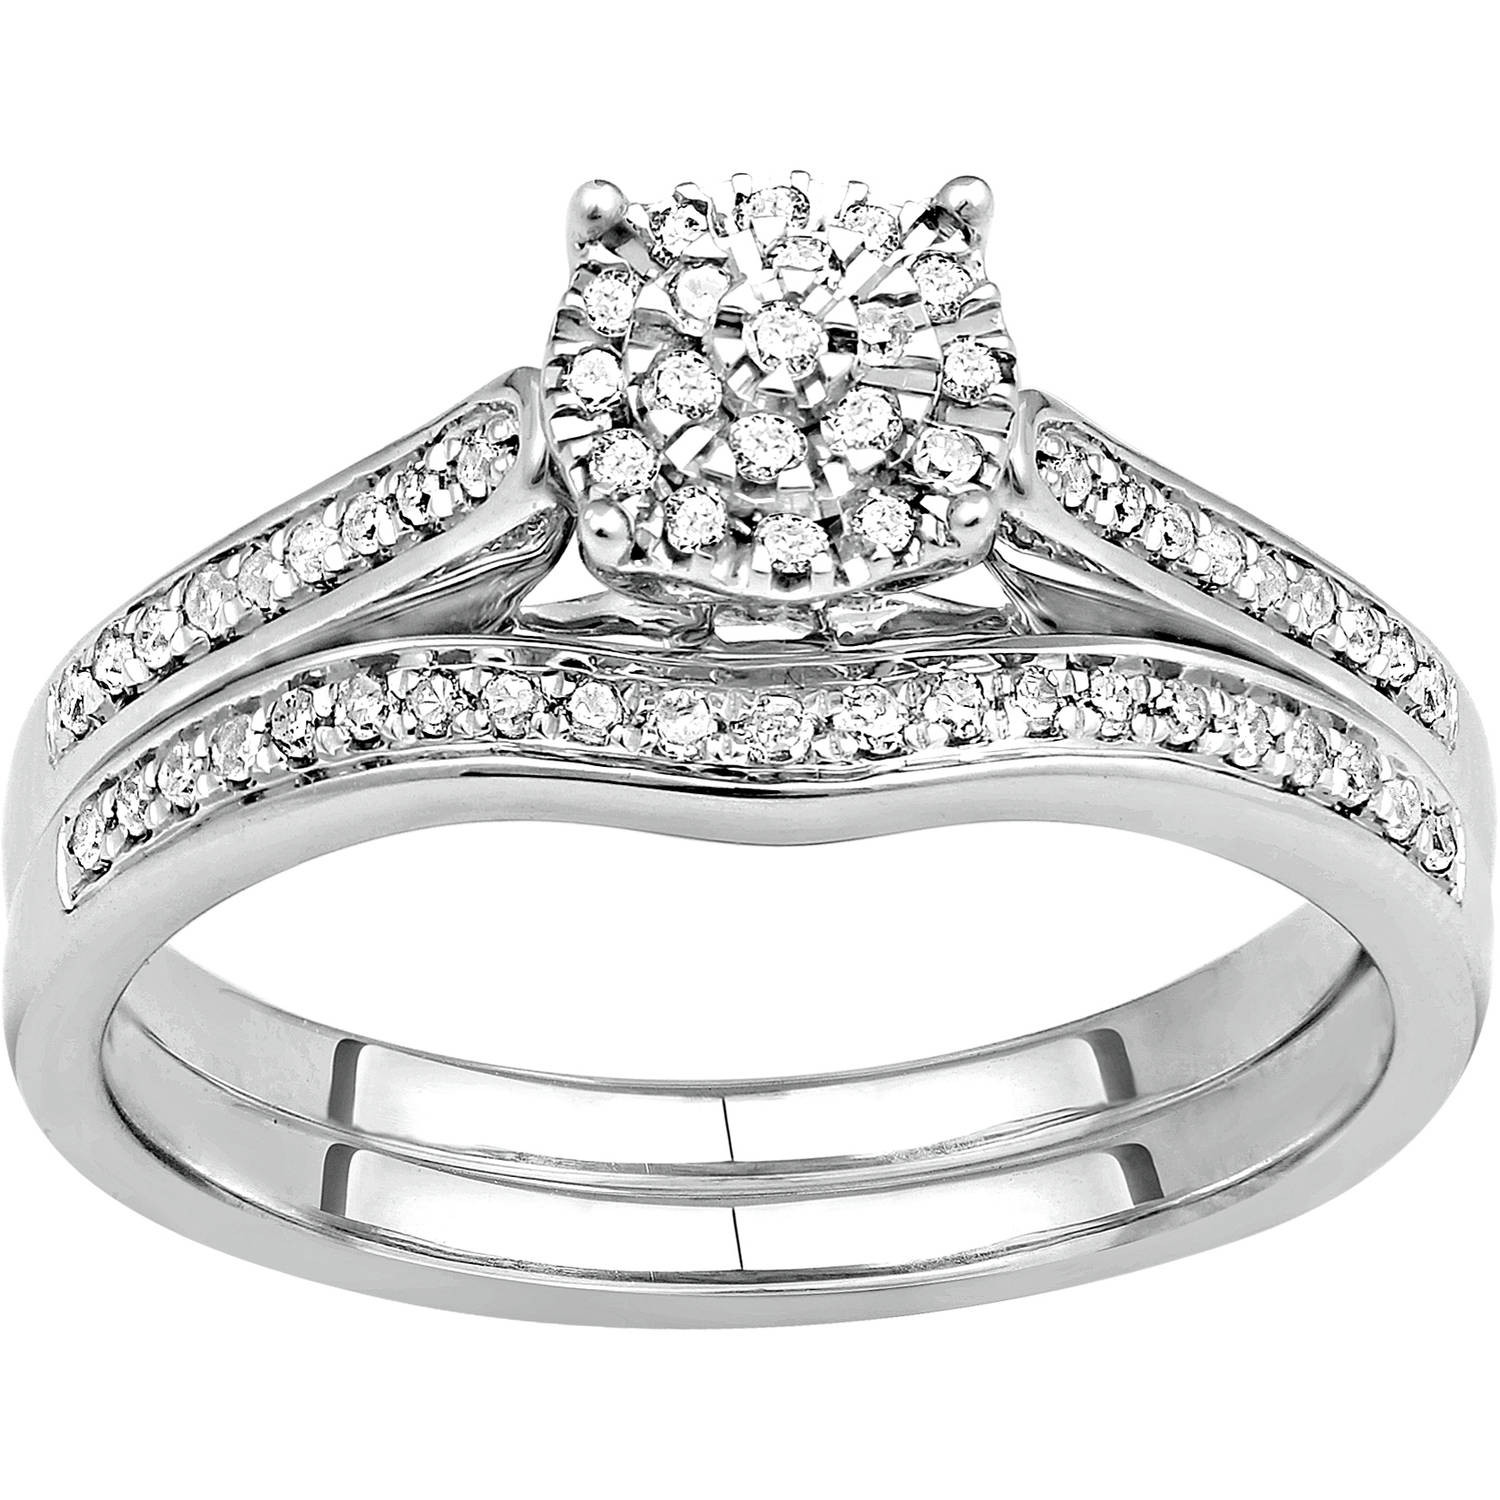 Forever Bride Wedding Rings
 Talking About Forever Bride 1 6 Carat T W Diamond Cluster